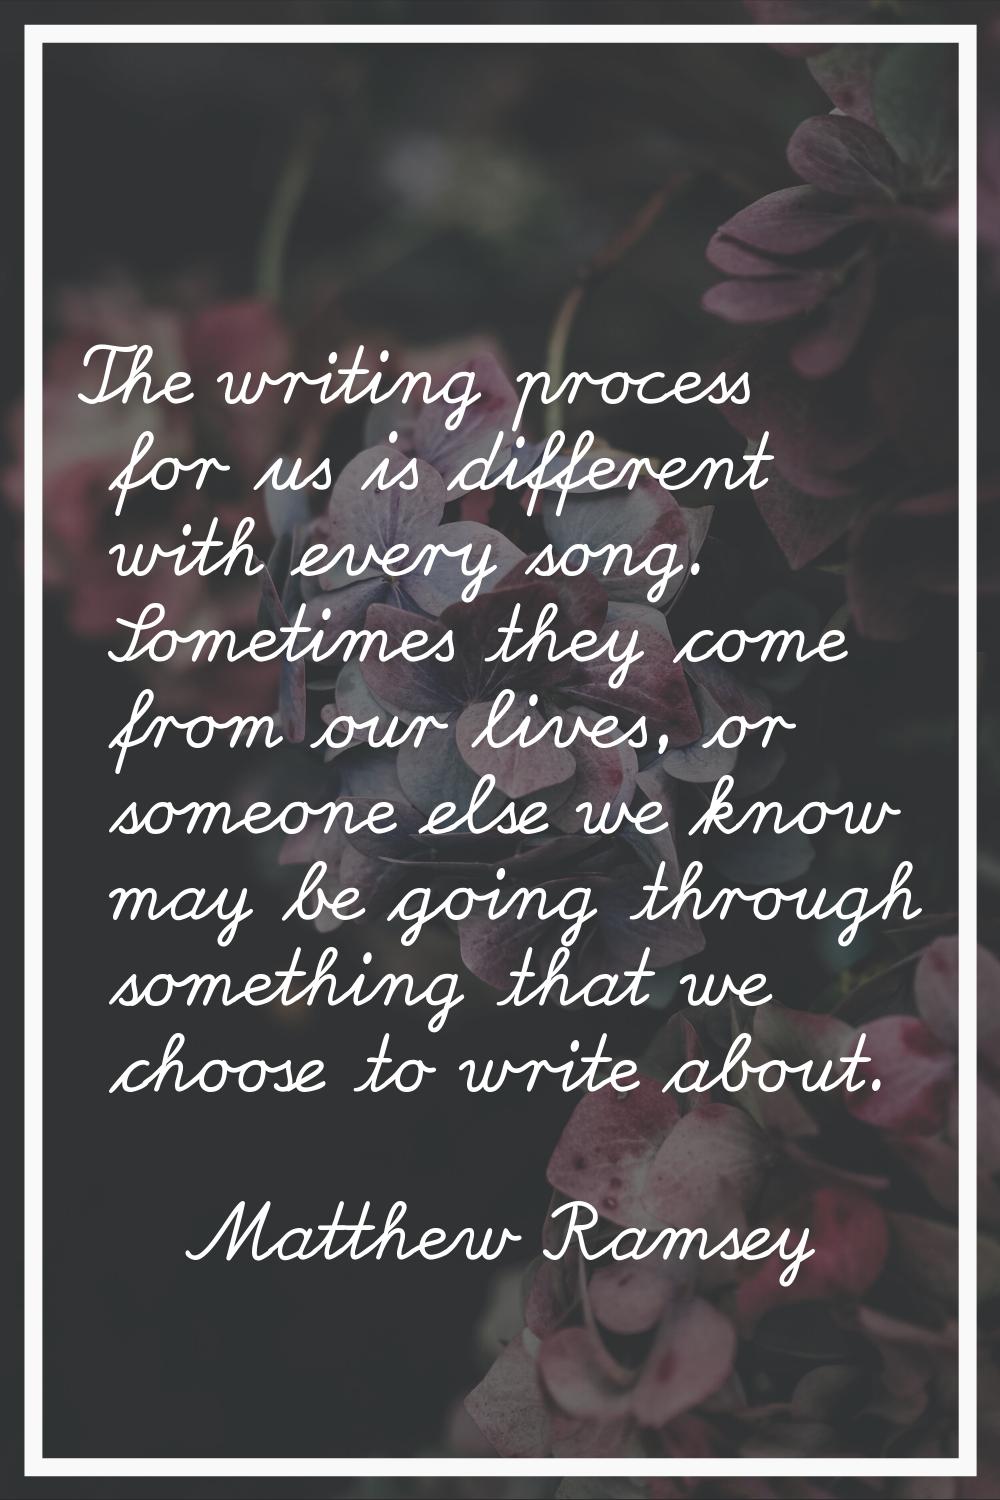 The writing process for us is different with every song. Sometimes they come from our lives, or som